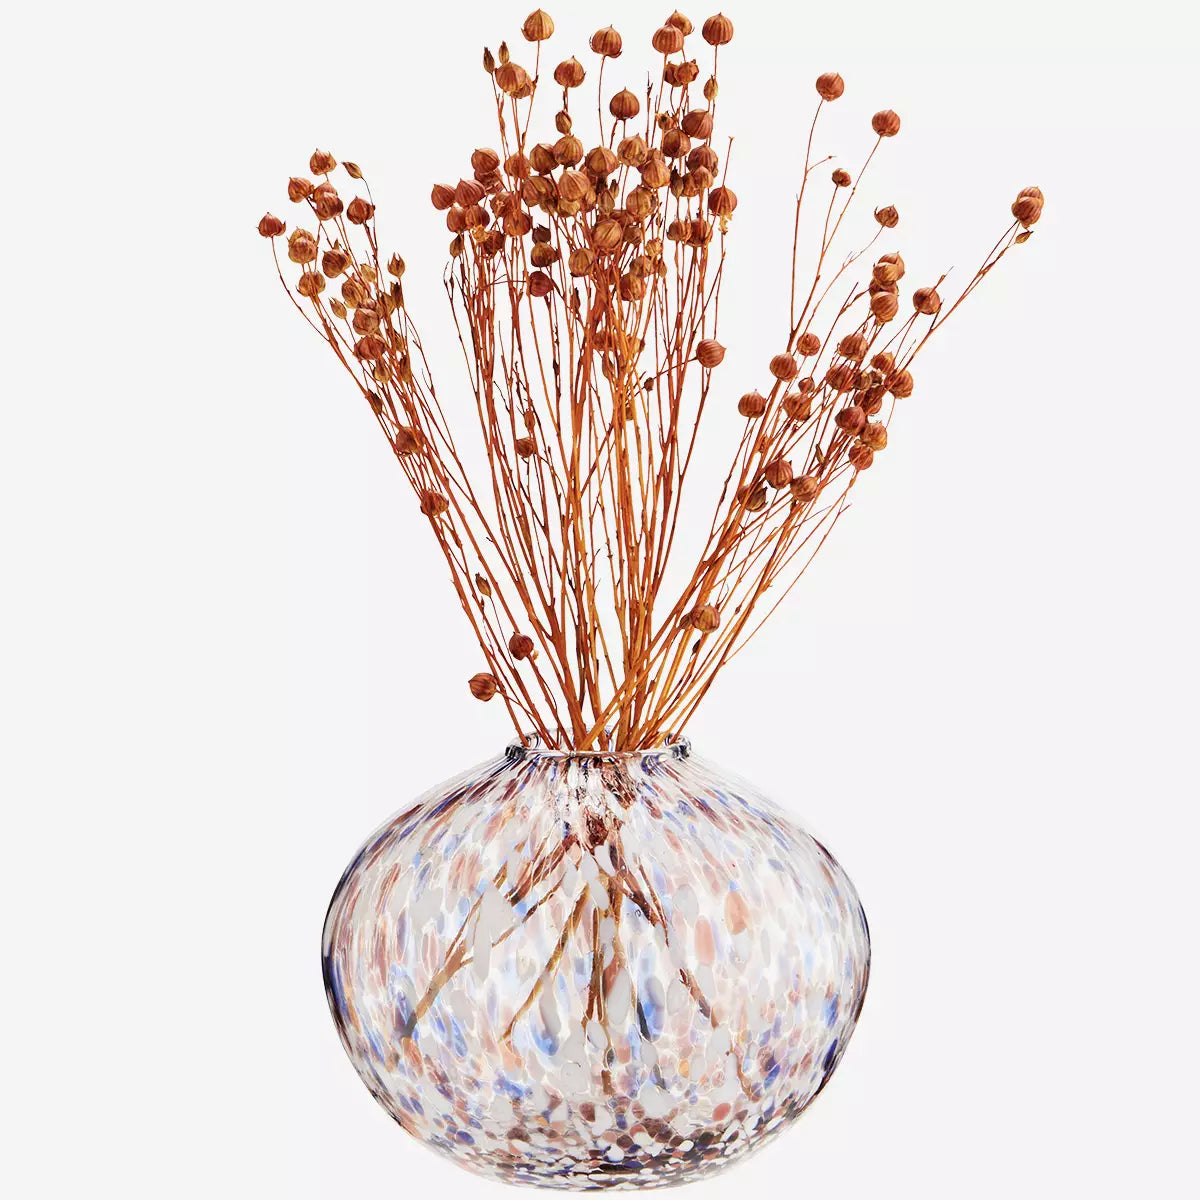 The Every Space handmade multi-coloured glass vase in orange, blue, and white for fresh and dried flowers by Madam Stoltz